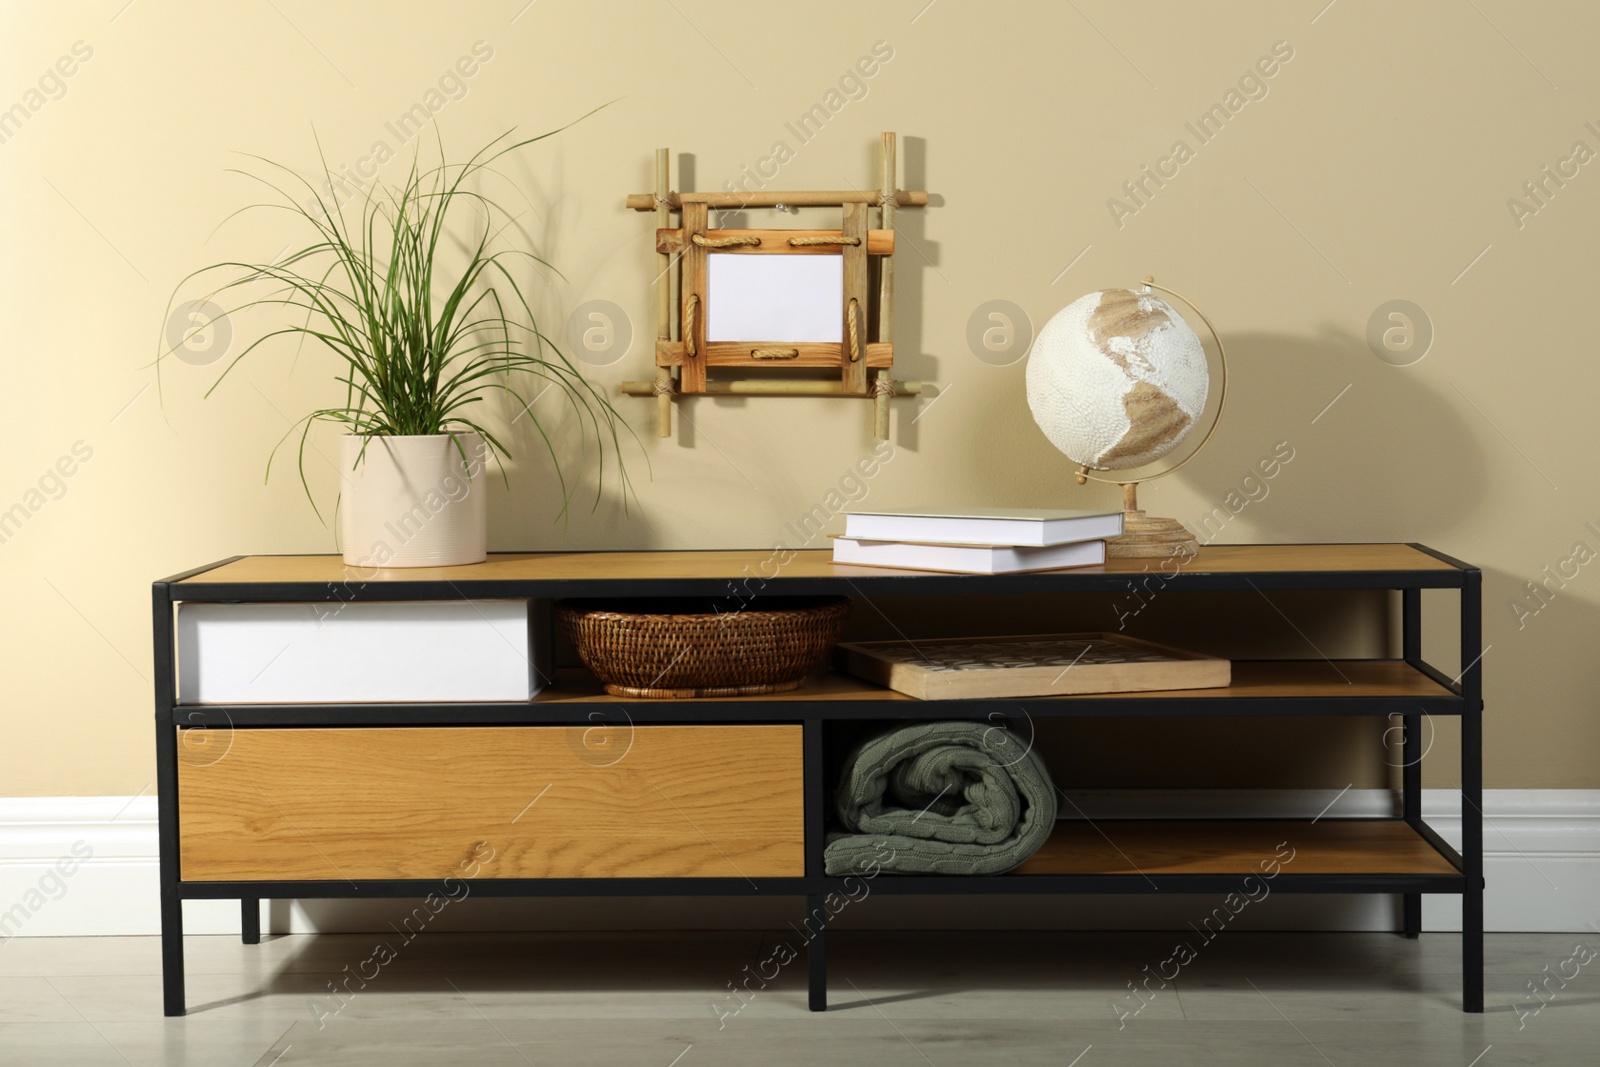 Photo of Stylish room interior with bamboo frame and wooden cabinet